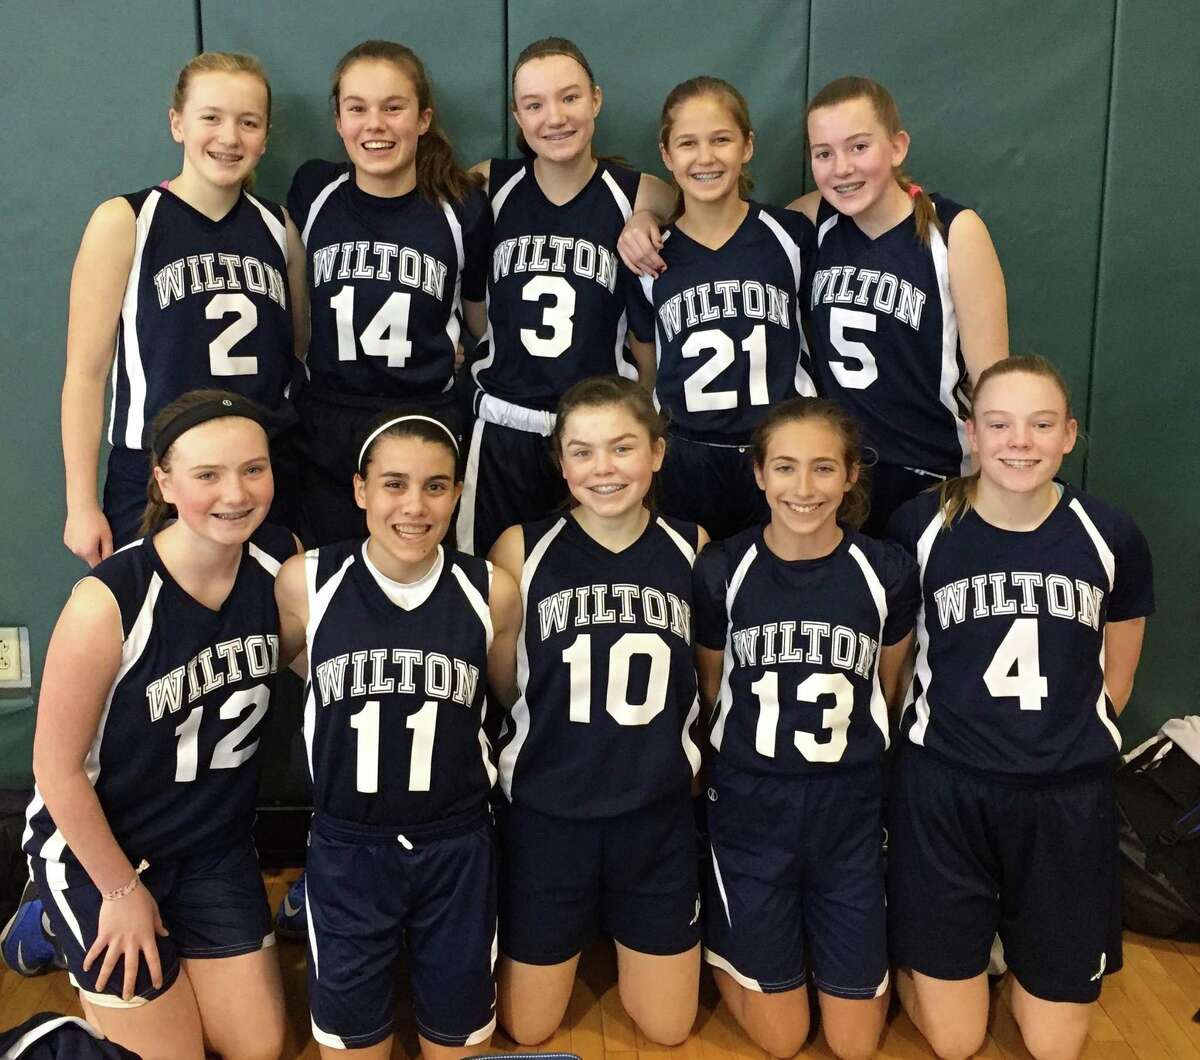 The Wilton girls 8th grade team was victorious last weekend. Team members include top row, from left, Ellie Coffey, Bella Andjelkovic, Ellie Copley, Morgan Lebek, and Erynn Floyd, and bottom row, from left, Katie Umphred, Olivia Rossi, Grace Williams, Leah Martins, and Catherine Dineen.